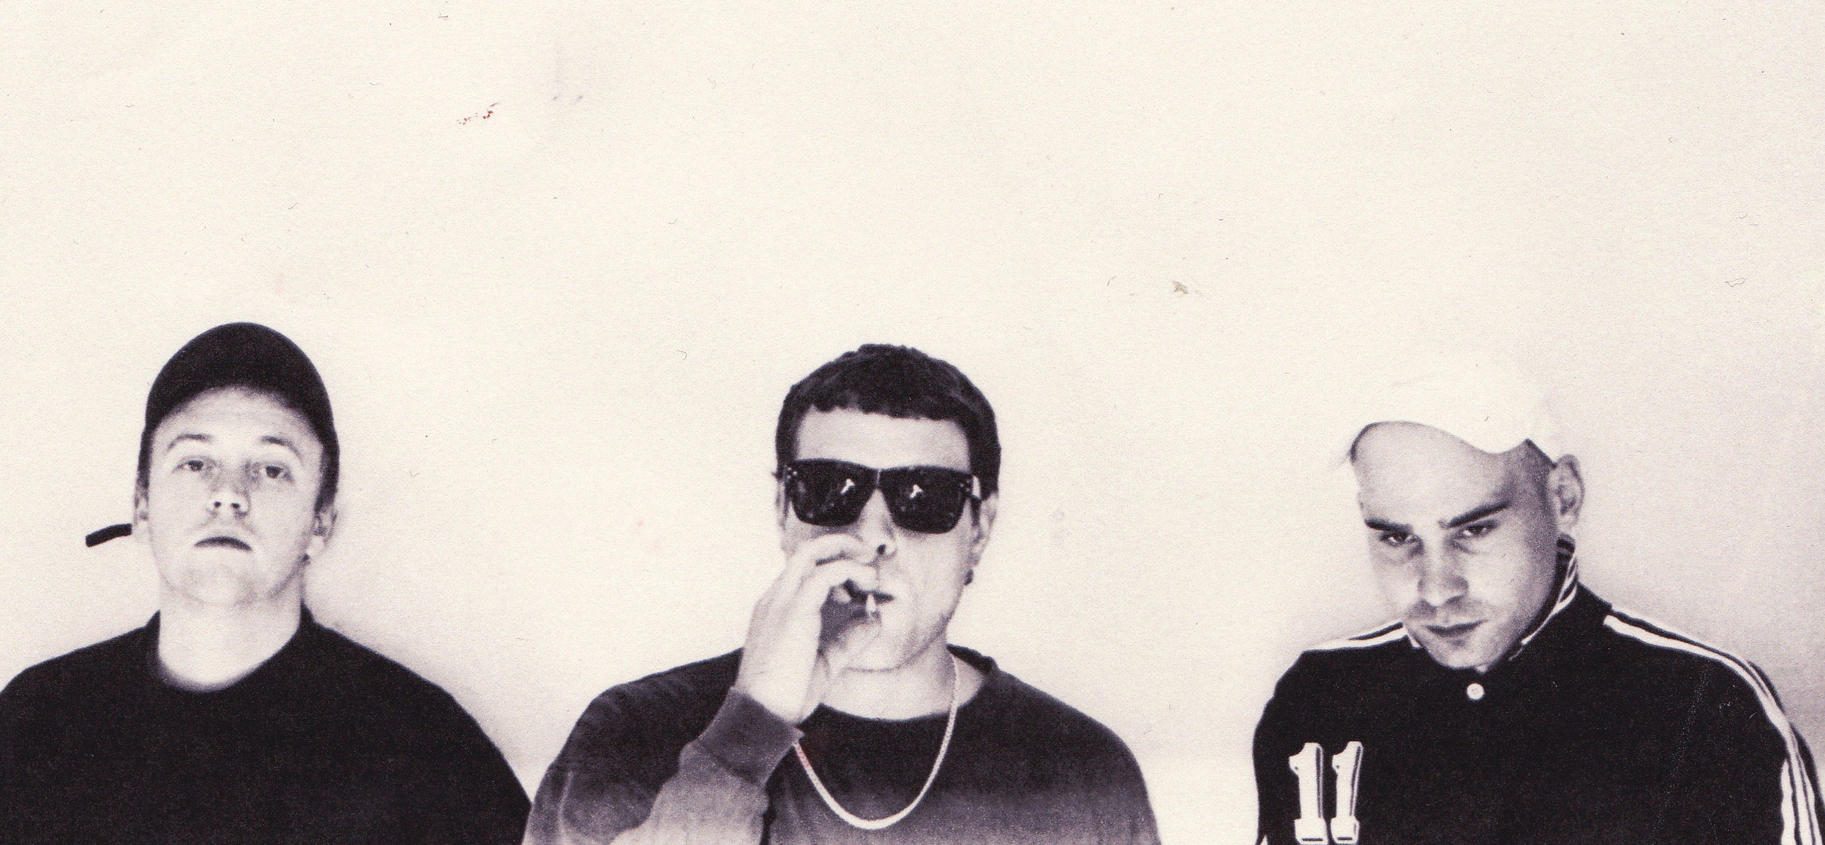 This Record Changed My Life: DMA’S